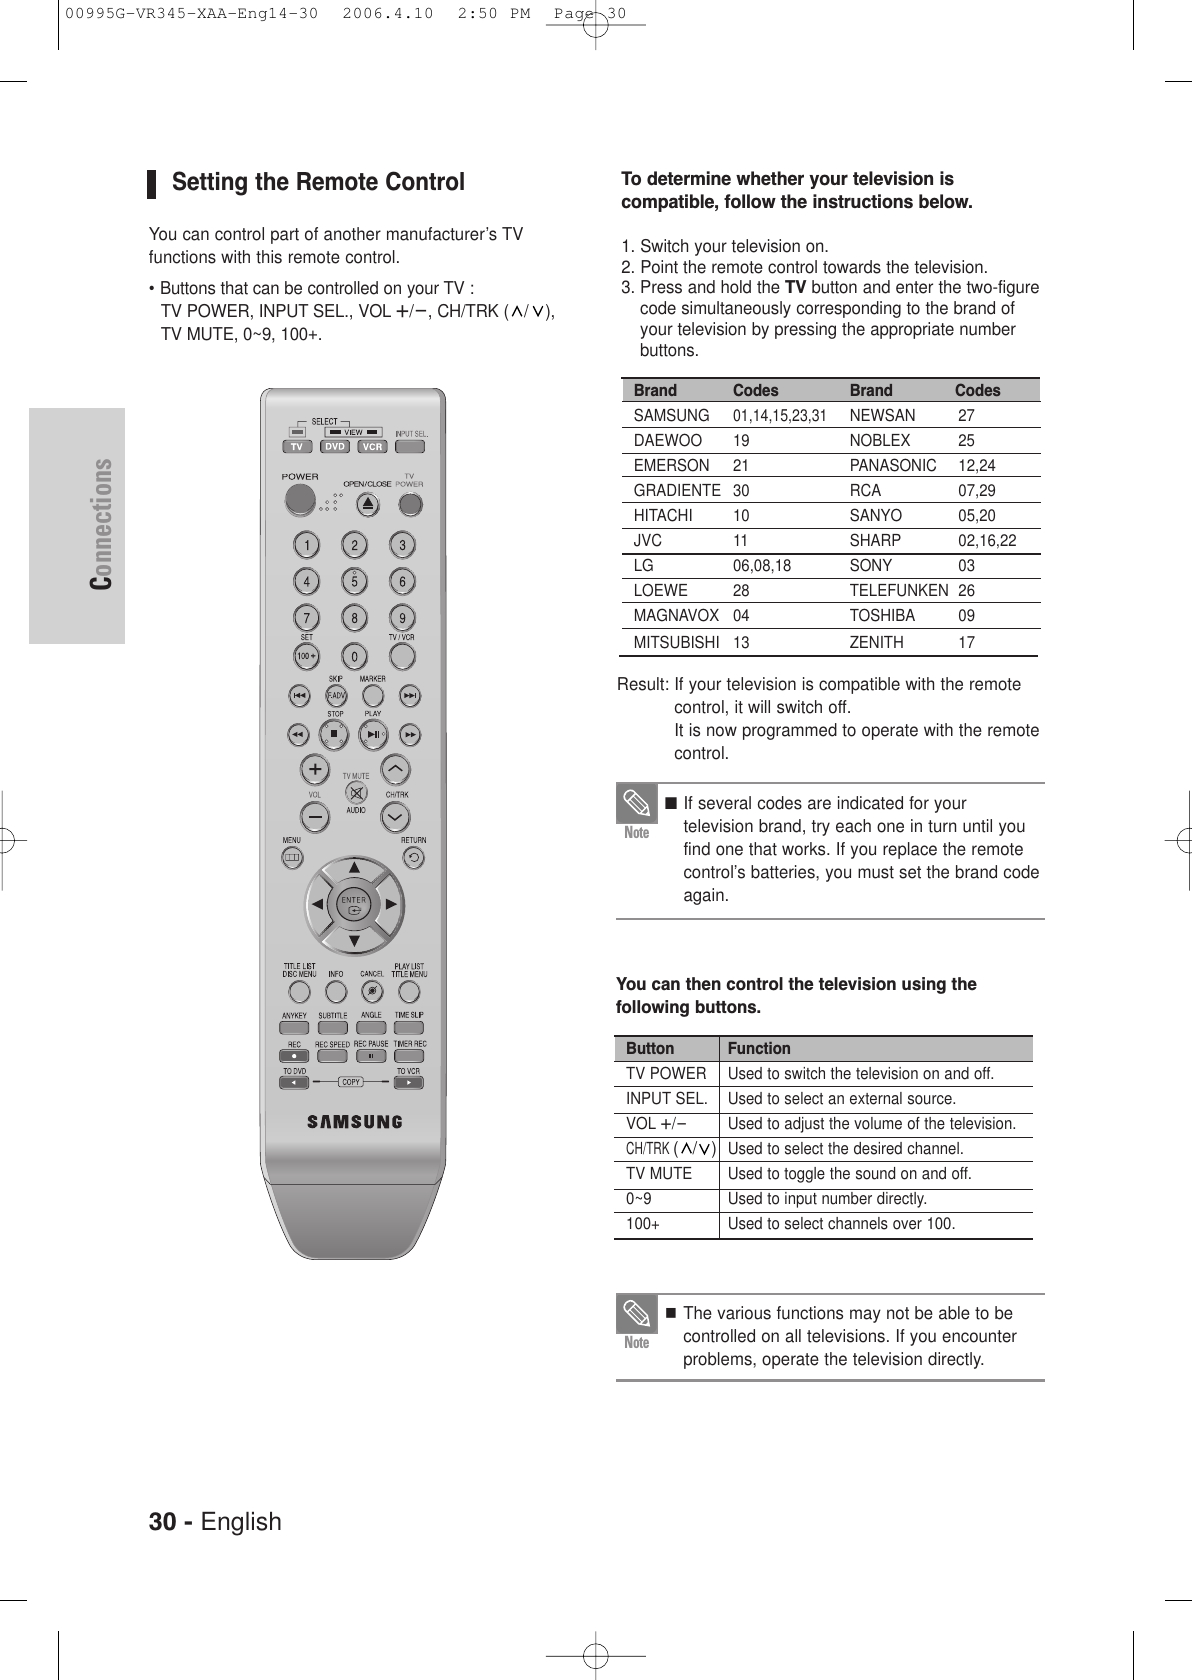 30 - EnglishConnectionsTo determine whether your television is compatible, follow the instructions below.1. Switch your television on.2. Point the remote control towards the television.3. Press and hold the TV button and enter the two-figurecode simultaneously corresponding to the brand ofyour television by pressing the appropriate numberbuttons.Result: If your television is compatible with the remotecontrol, it will switch off.It is now programmed to operate with the remotecontrol.You can then control the television using the following buttons.Brand  Codes SAMSUNG01,14,15,23,31DAEWOO 19EMERSON 21GRADIENTE 30HITACHI 10JVC 11LG 06,08,18LOEWE 28MAGNAVOX 04MITSUBISHI 13Brand  CodesNEWSAN 27NOBLEX 25PANASONIC 12,24RCA 07,29SANYO 05,20SHARP 02,16,22SONY 03TELEFUNKEN 26TOSHIBA 09ZENITH 17Button FunctionTV POWER Used to switch the television on and off.INPUT SEL. Used to select an external source.VOL+/-Used to adjust the volume of the television.CH/TRK (/)Used to select the desired channel.TV MUTE Used to toggle the sound on and off.0~9 Used to input number directly.100+ Used to select channels over 100.■ If several codes are indicated for your television brand, try each one in turn until youfind one that works. If you replace the remotecontrol’s batteries, you must set the brand codeagain.NoteThe various functions may not be able to be controlled on all televisions. If you encounterproblems, operate the television directly.NoteSetting the Remote ControlYou can control part of another manufacturer’s TVfunctions with this remote control.• Buttons that can be controlled on your TV : TV POWER, INPUT SEL., VOL+/-, CH/TRK ( / ),TV MUTE, 0~9, 100+.  00995G-VR345-XAA-Eng14-30  2006.4.10  2:50 PM  Page 30